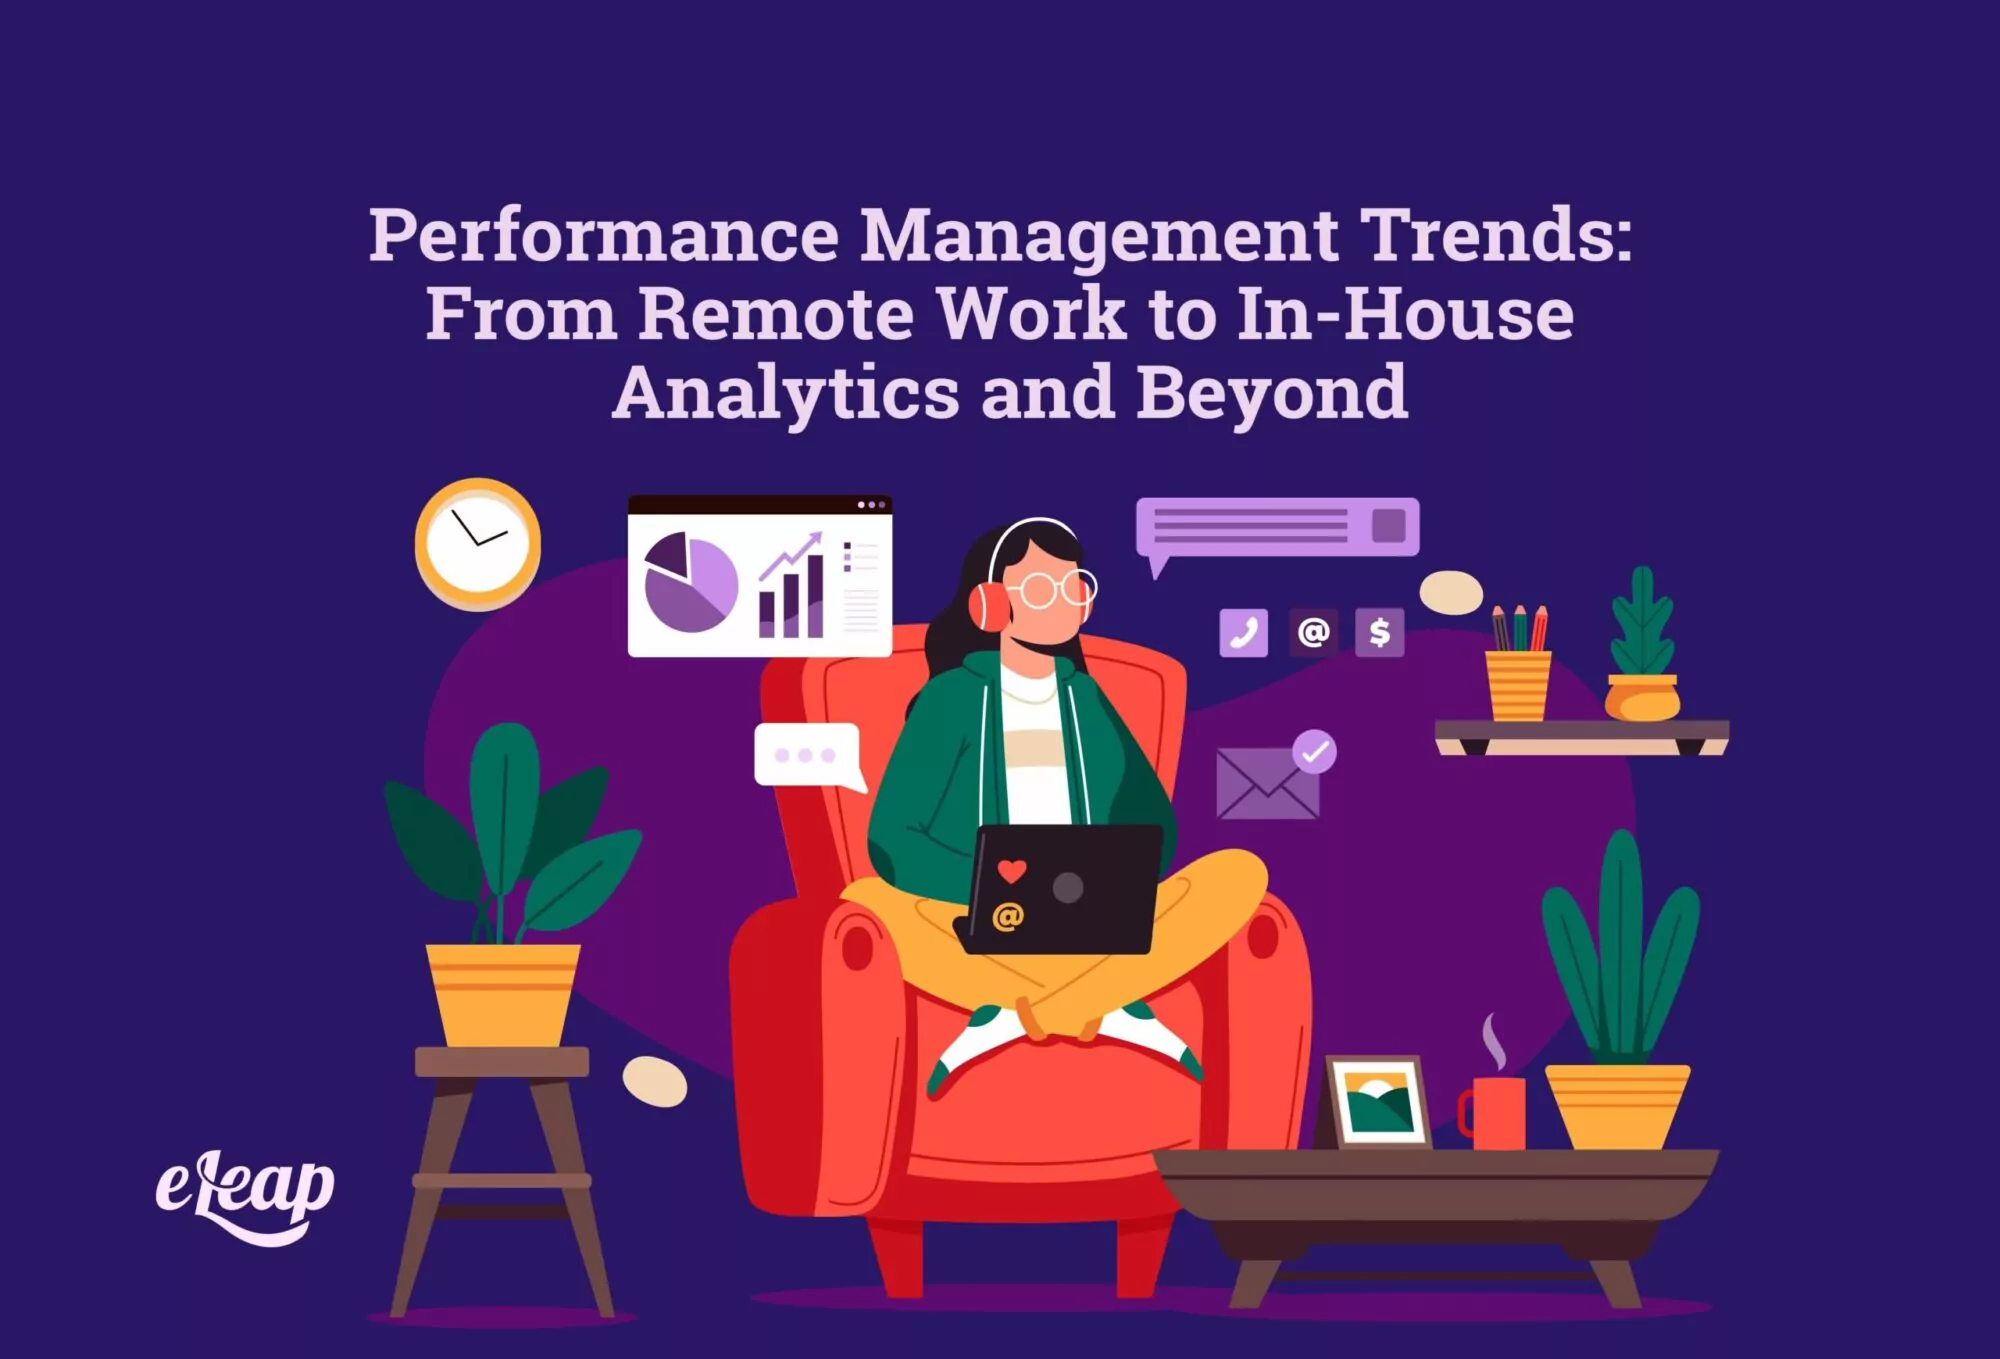 Performance Management Trends: From Remote Work to In-House Analytics and Beyond